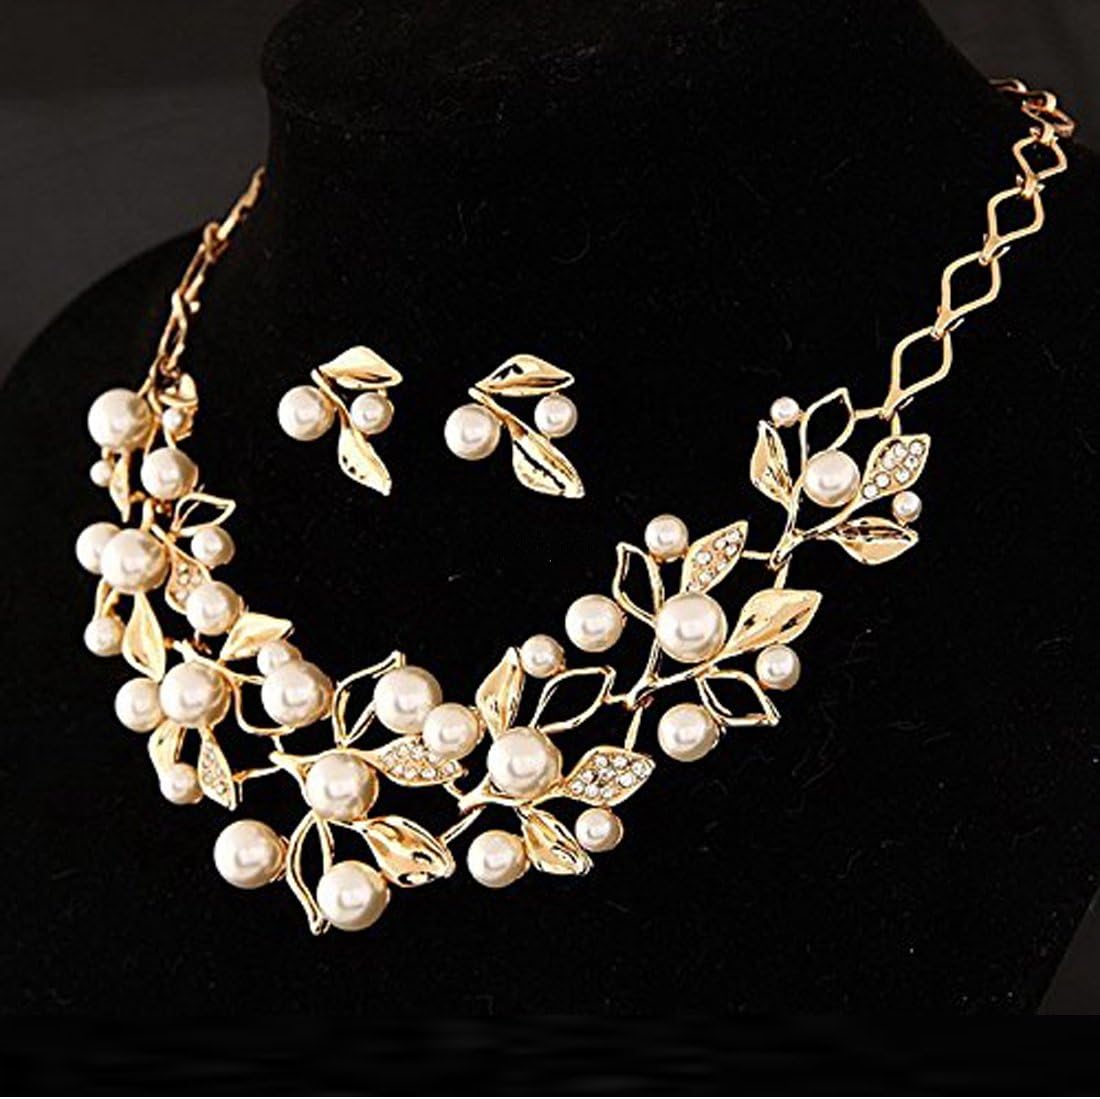 Yellow Chimes Necklace with Earrings Collection Gold Plated and Pearl Jewellery Set for Women